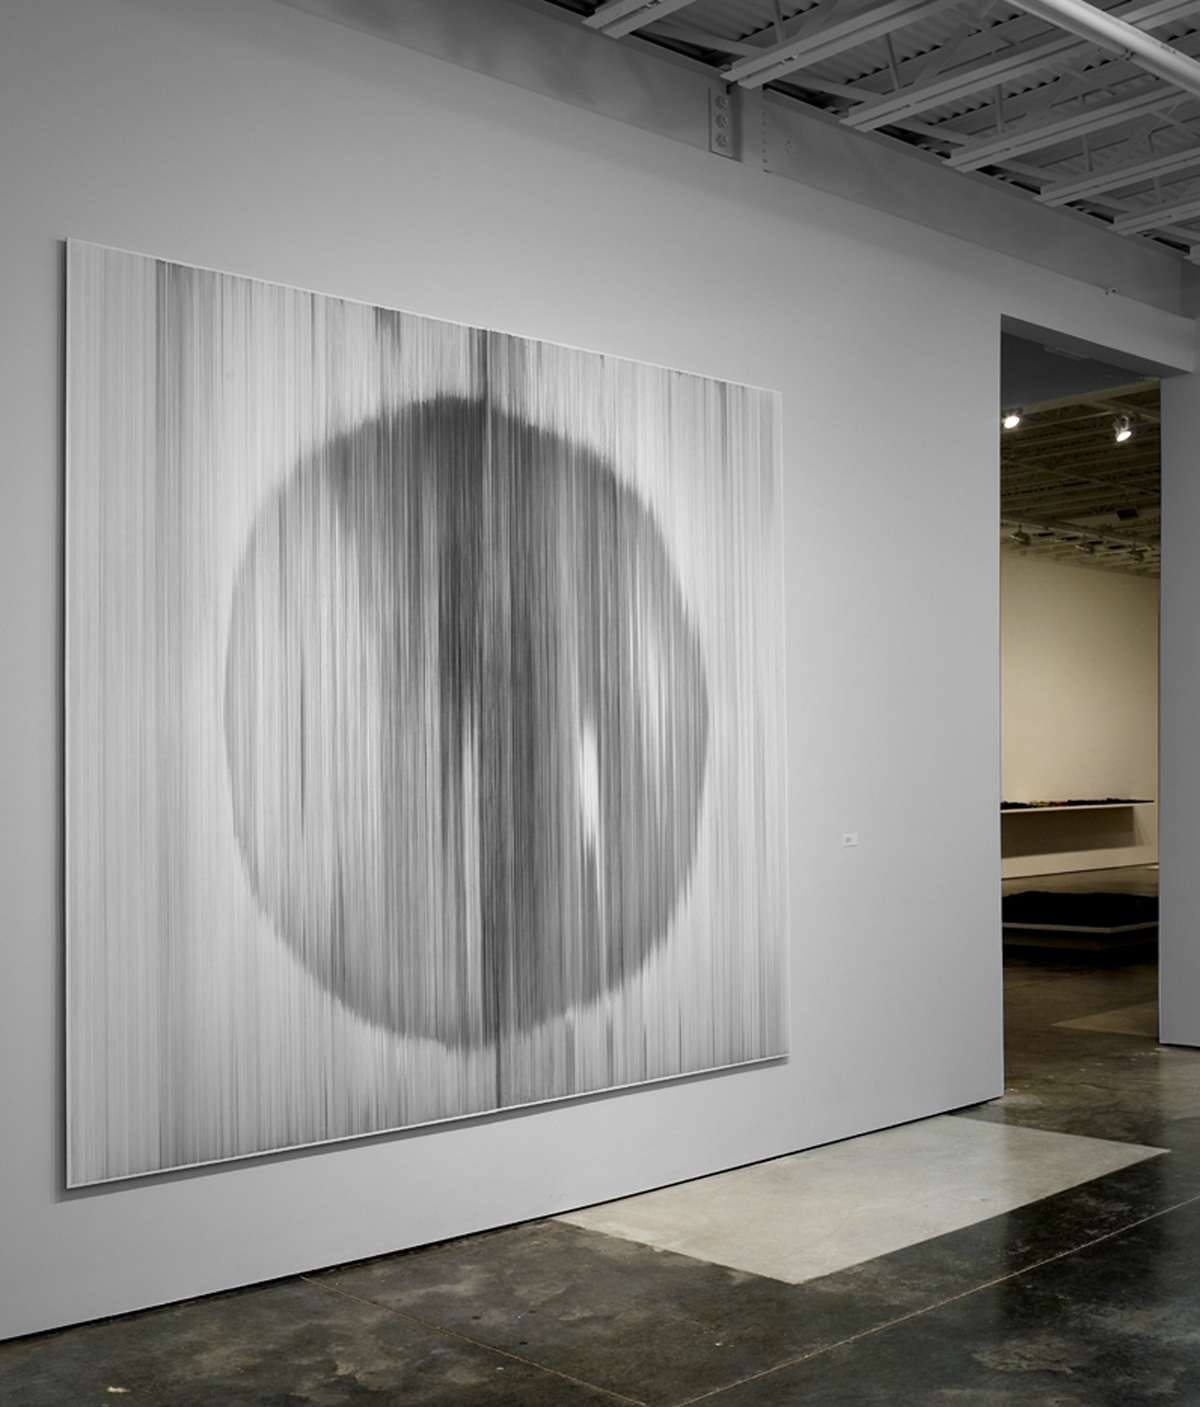    parallel 12 (round) &nbsp;  2009 graphite on cotton mat board 9x 10 feet (two panels) Private collection, Dallas, Texas 